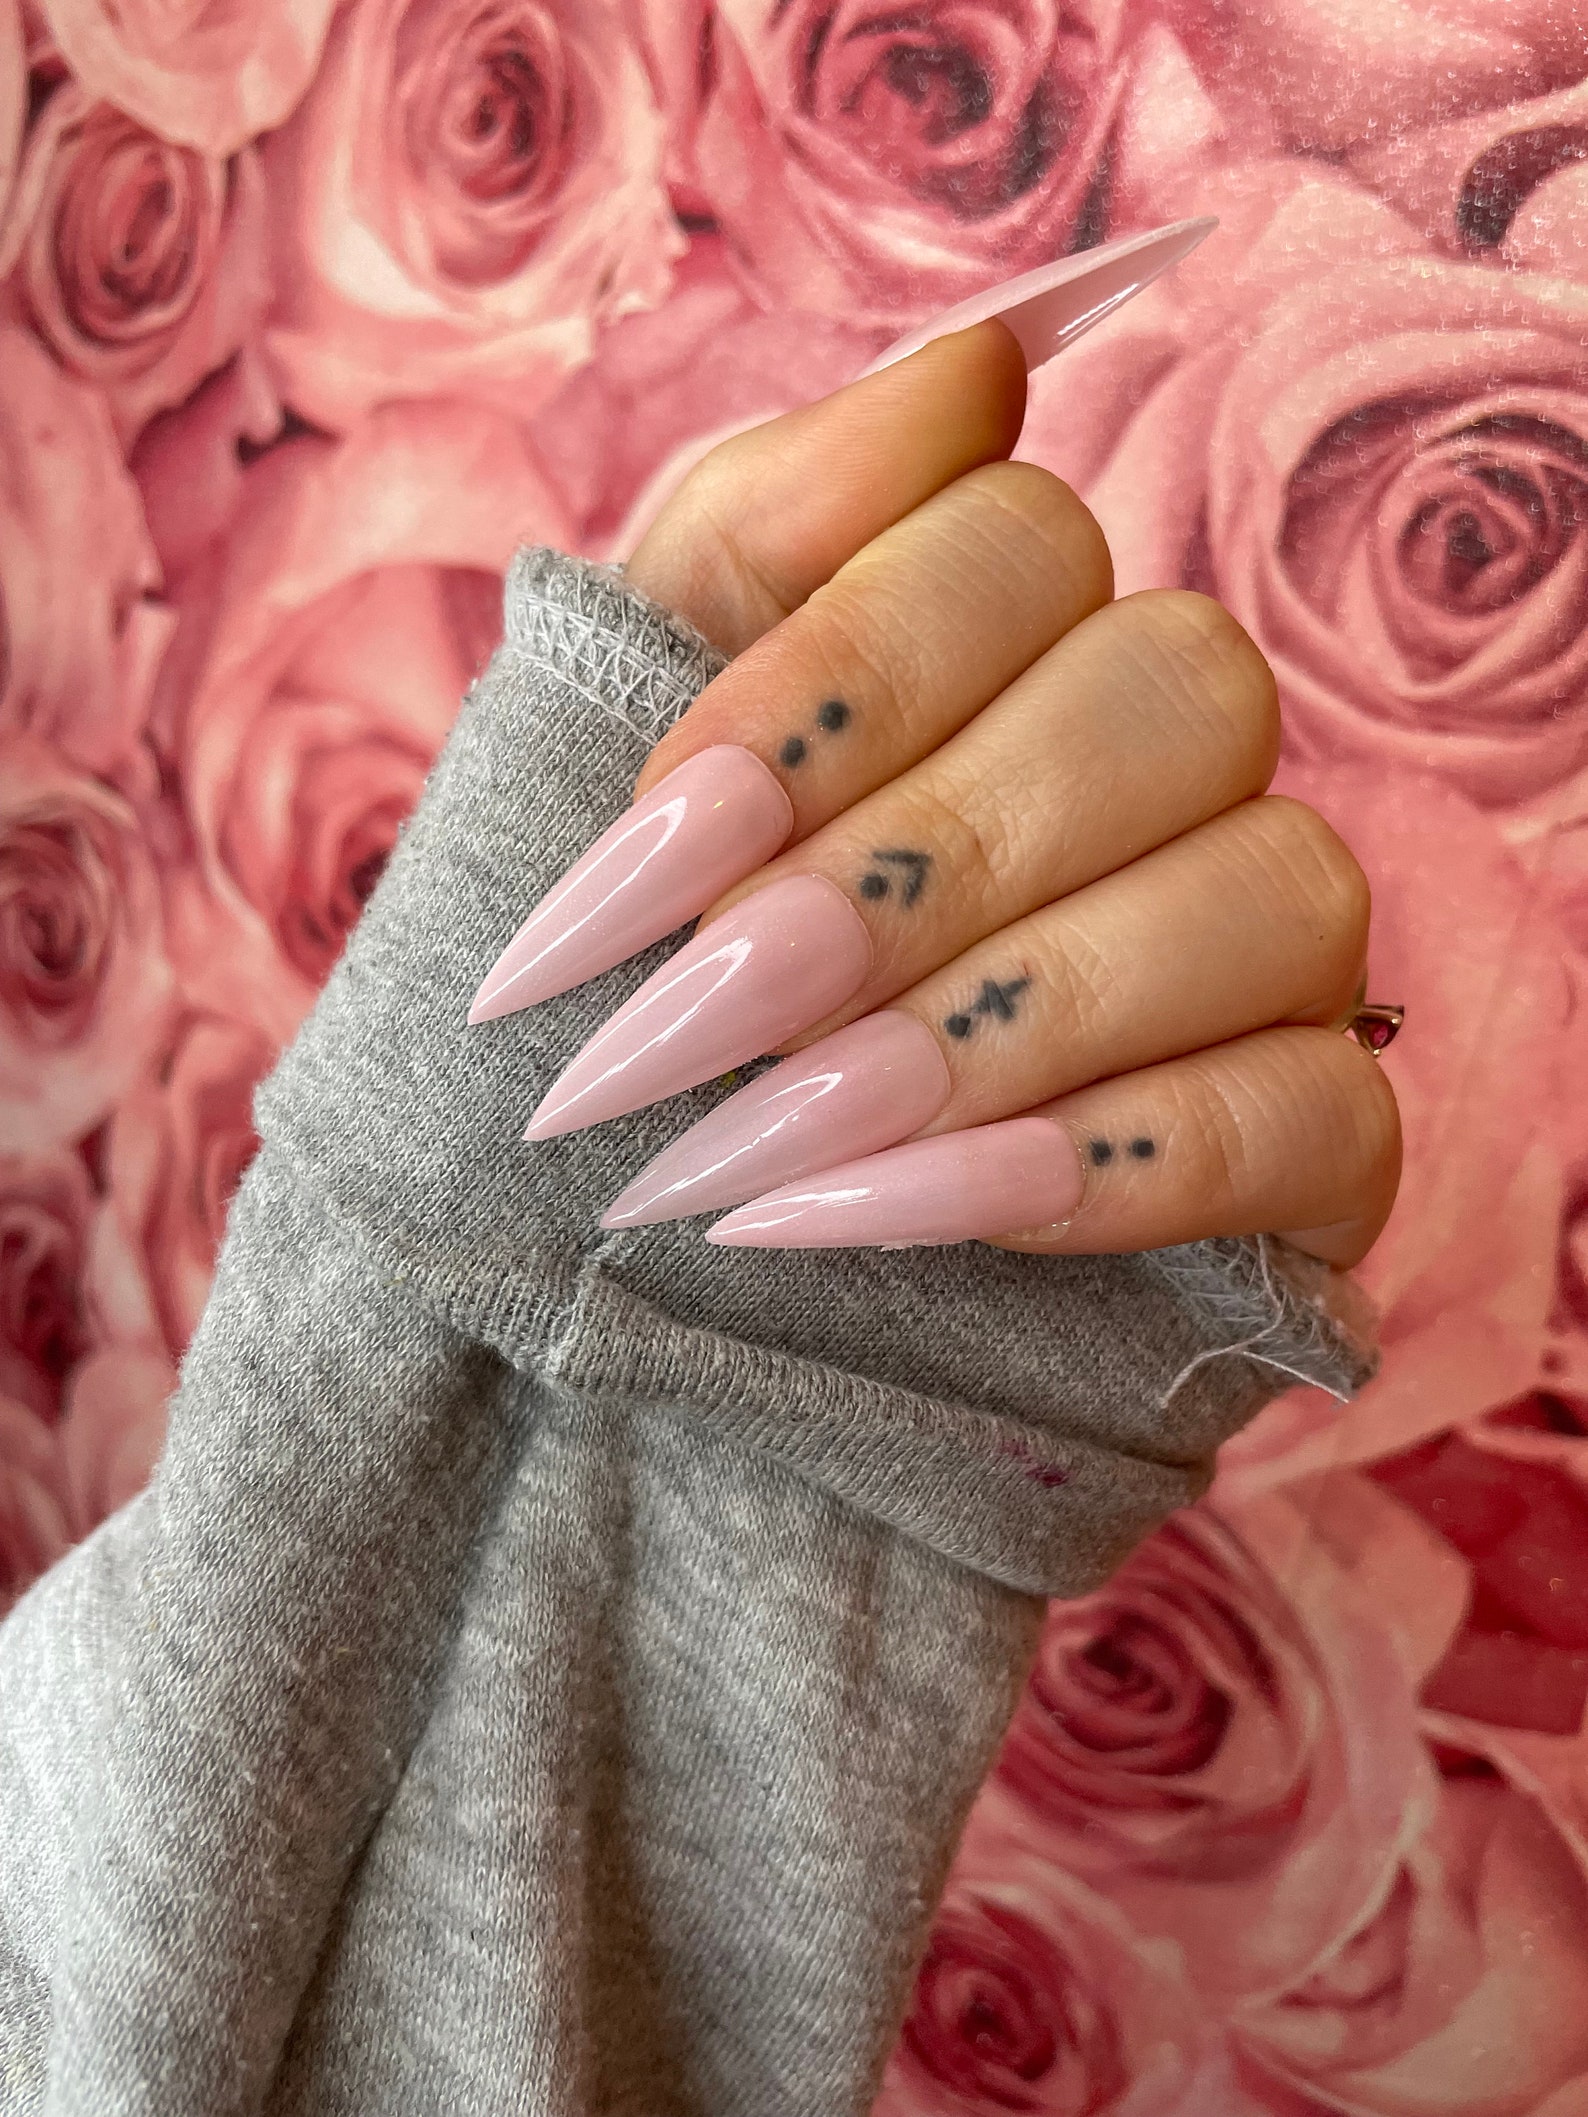 Nails of Instagram: 8 Best Accounts For Long Nails